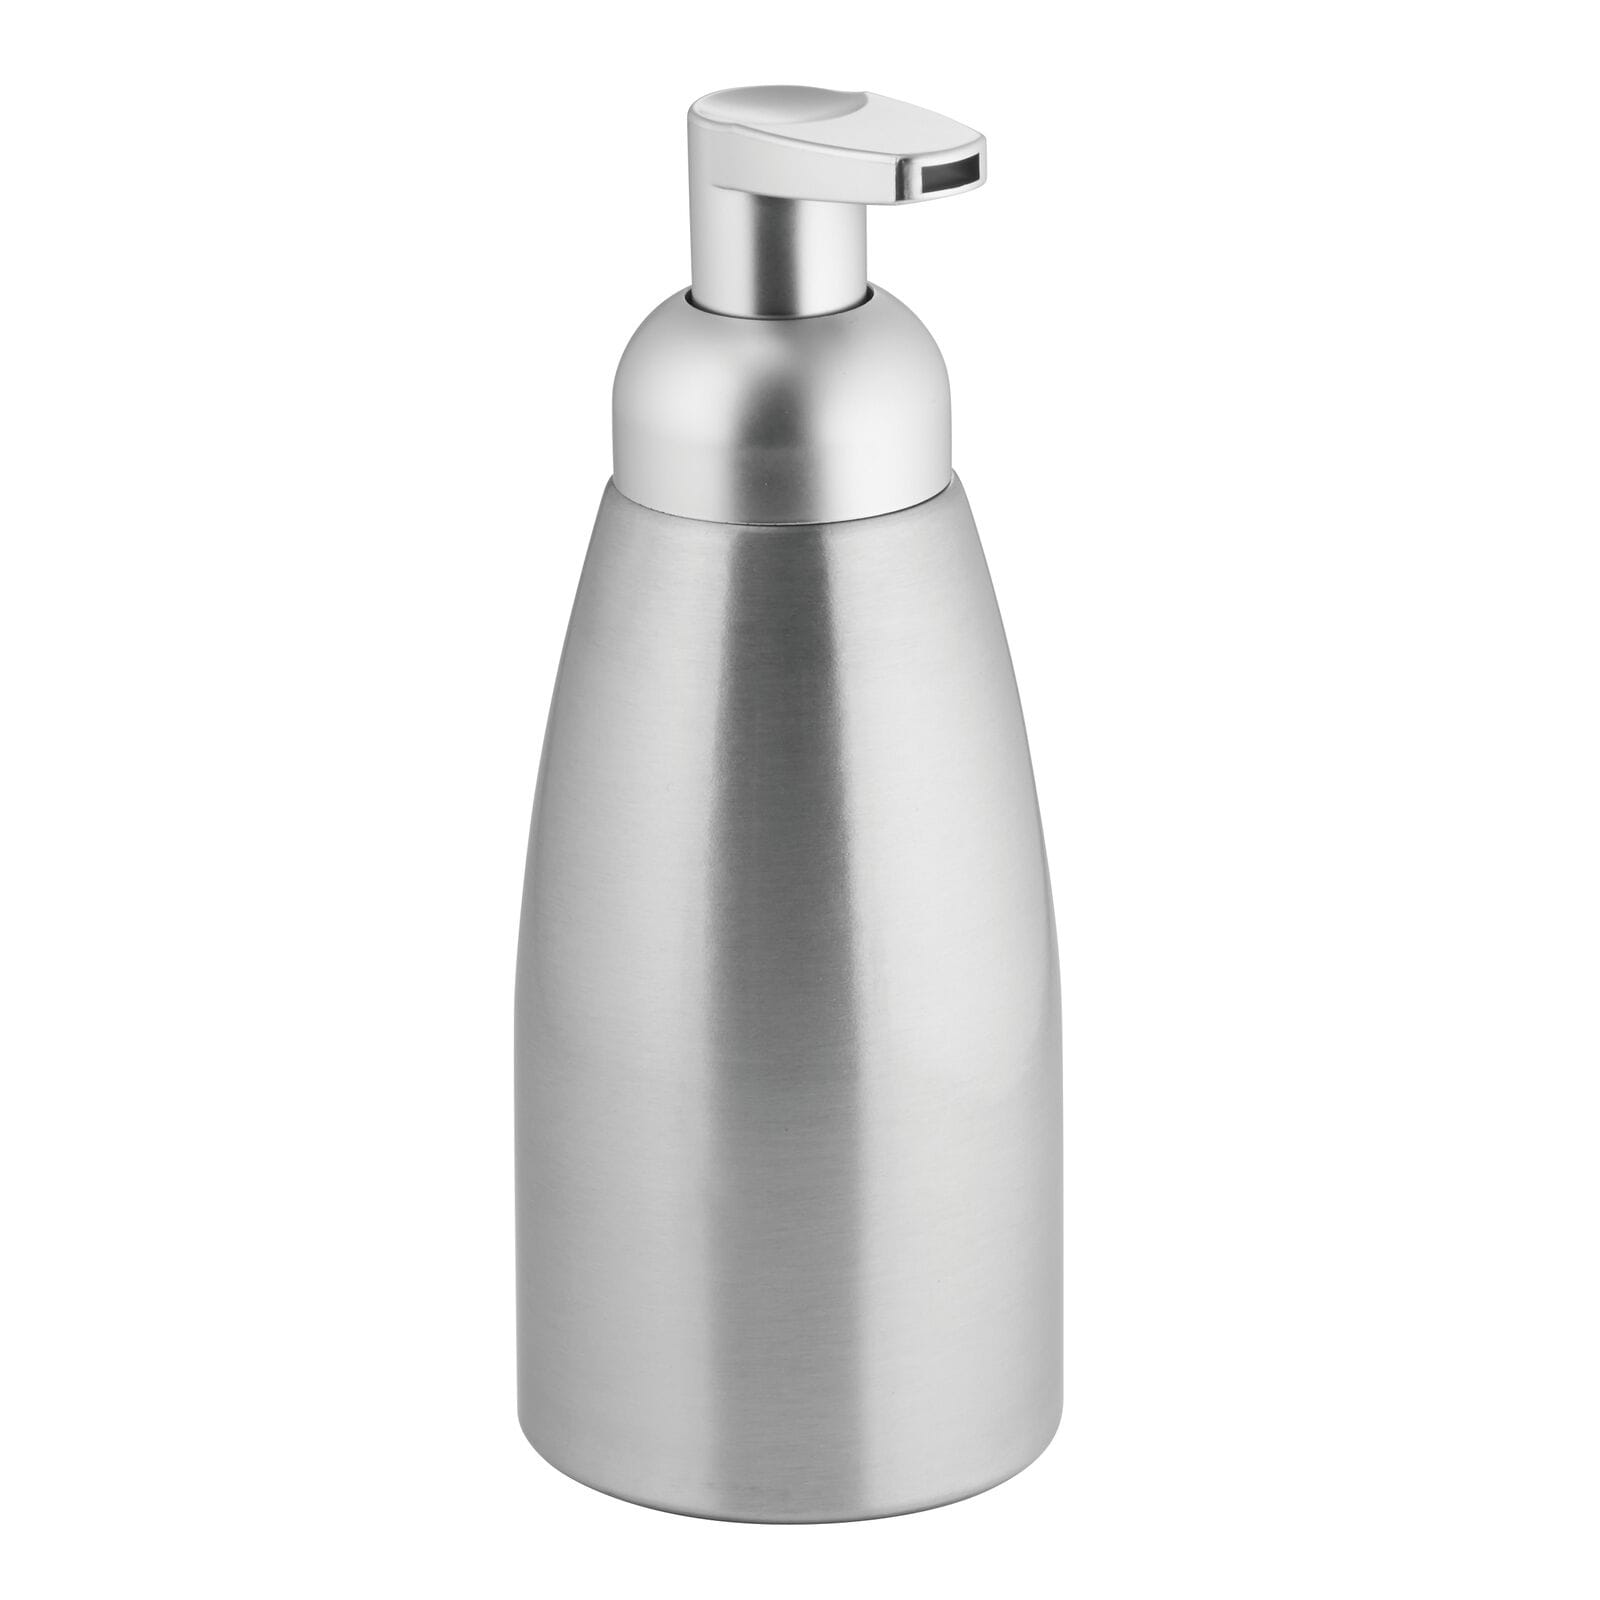 https://ak1.ostkcdn.com/images/products/is/images/direct/1b1c490fa5e9a4436ef5d00ee078452ca25ee09a/mDesign-Aluminum-Foaming-Soap-Dispenser-Pump-Bottle%2C-4-Pack---Brushed-Silver.jpg